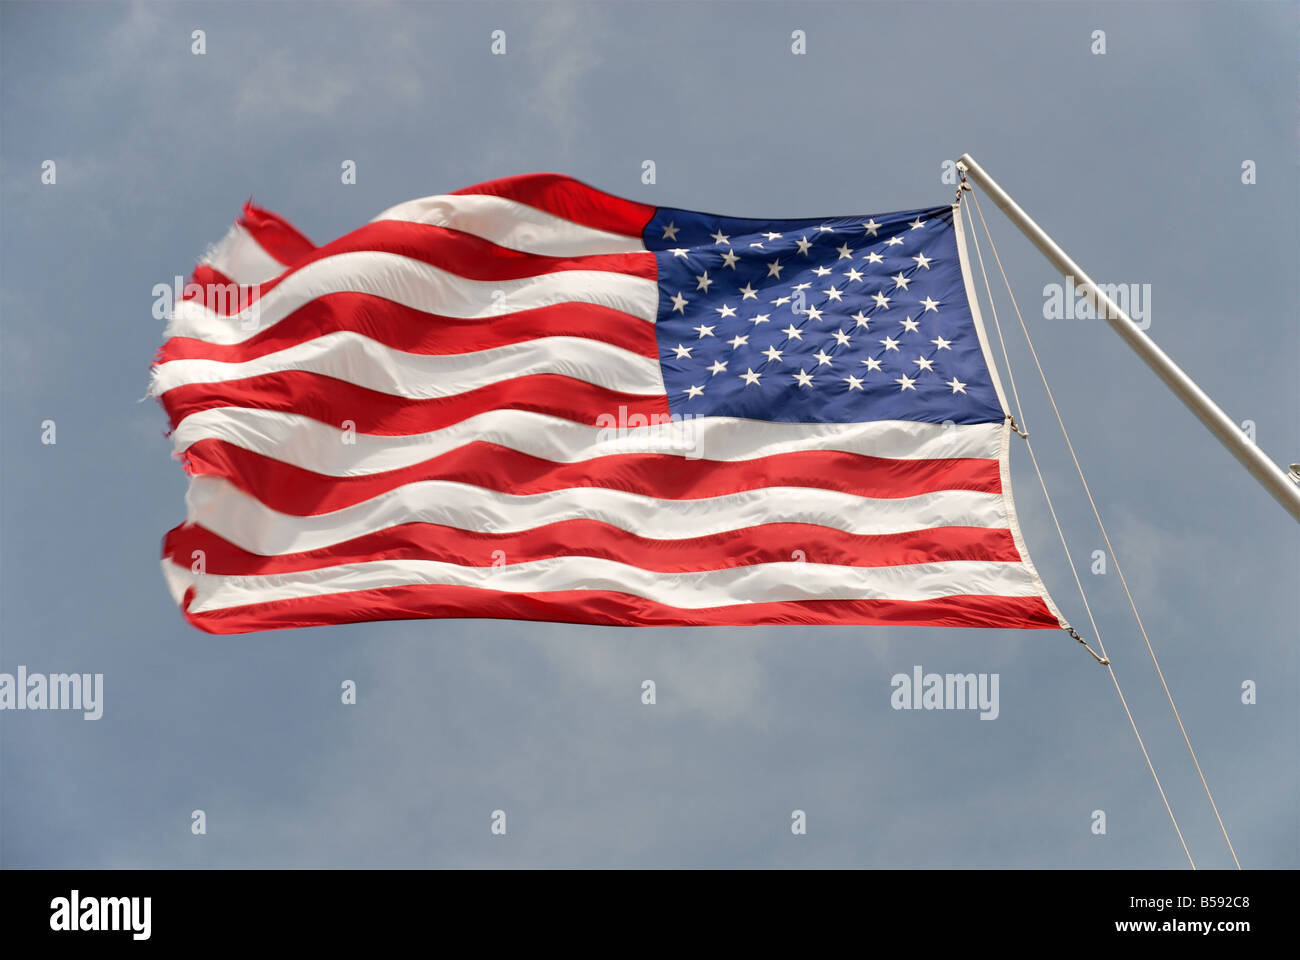 American state flag flying in the wind, with blue sky and clouds in the background Stock Photo